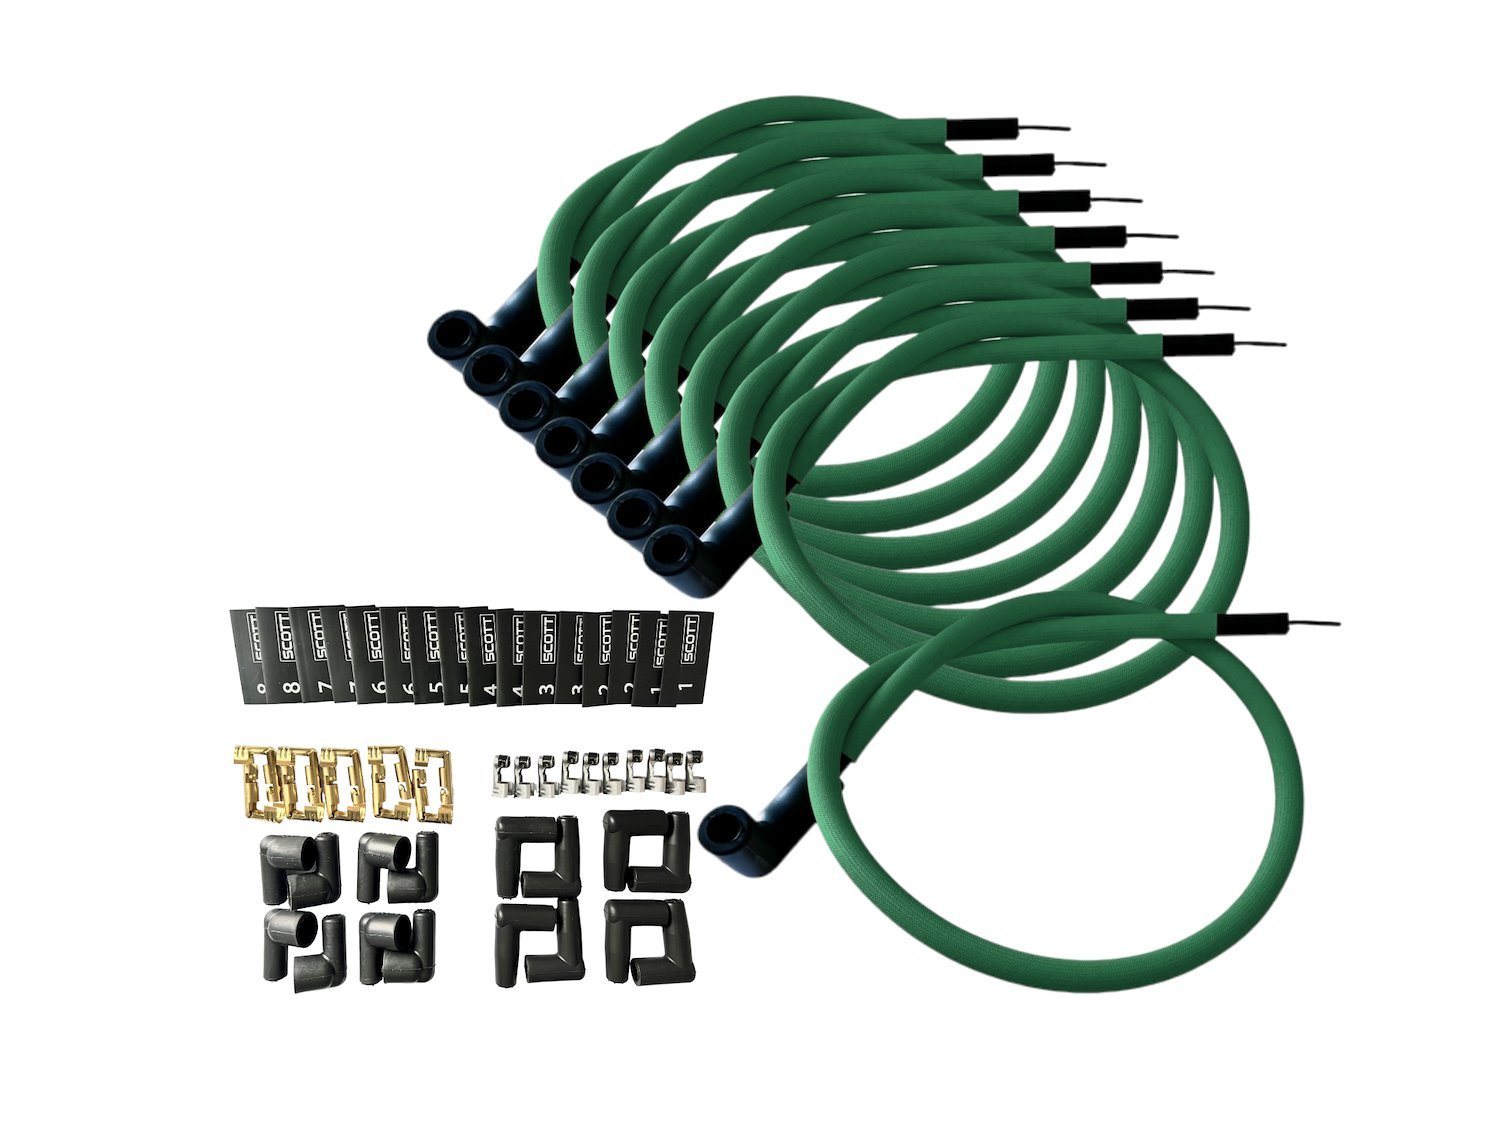 SPW-PS-K90-4 DIY High-Performance Fiberglass-Oversleeved Spark Plug Wire Set for DIY Kits, 90-Degree Boot [Green]